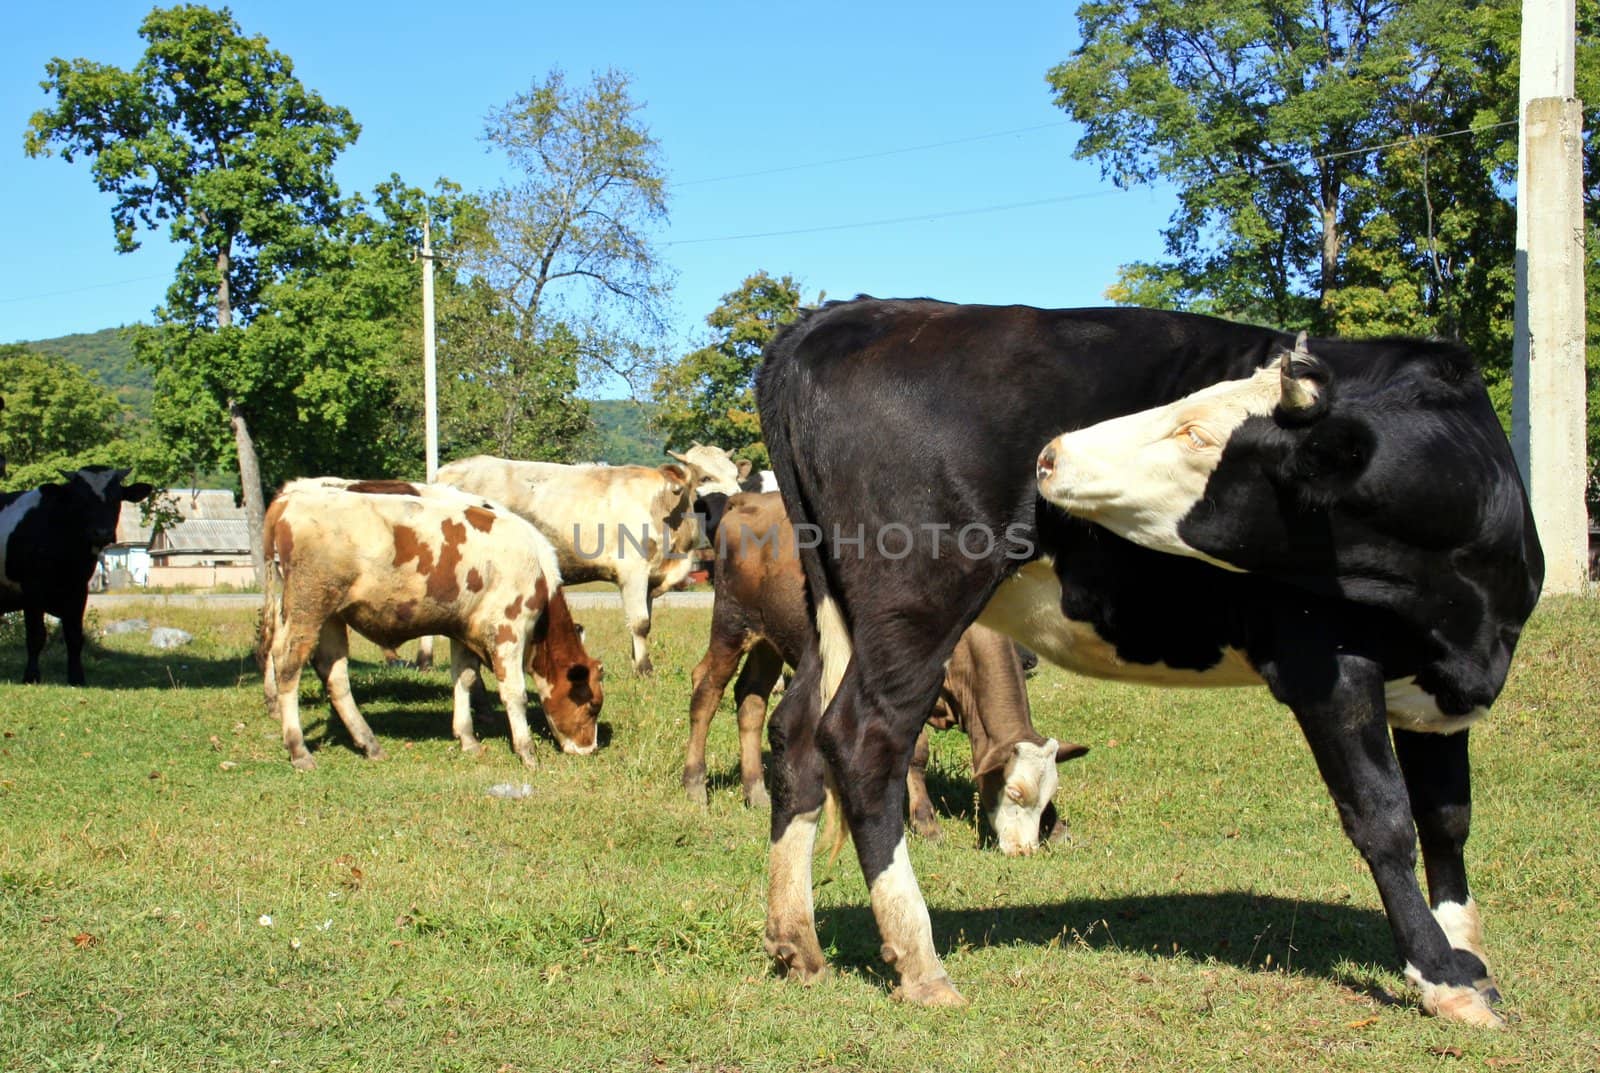 Cows eat a grass on a meadow